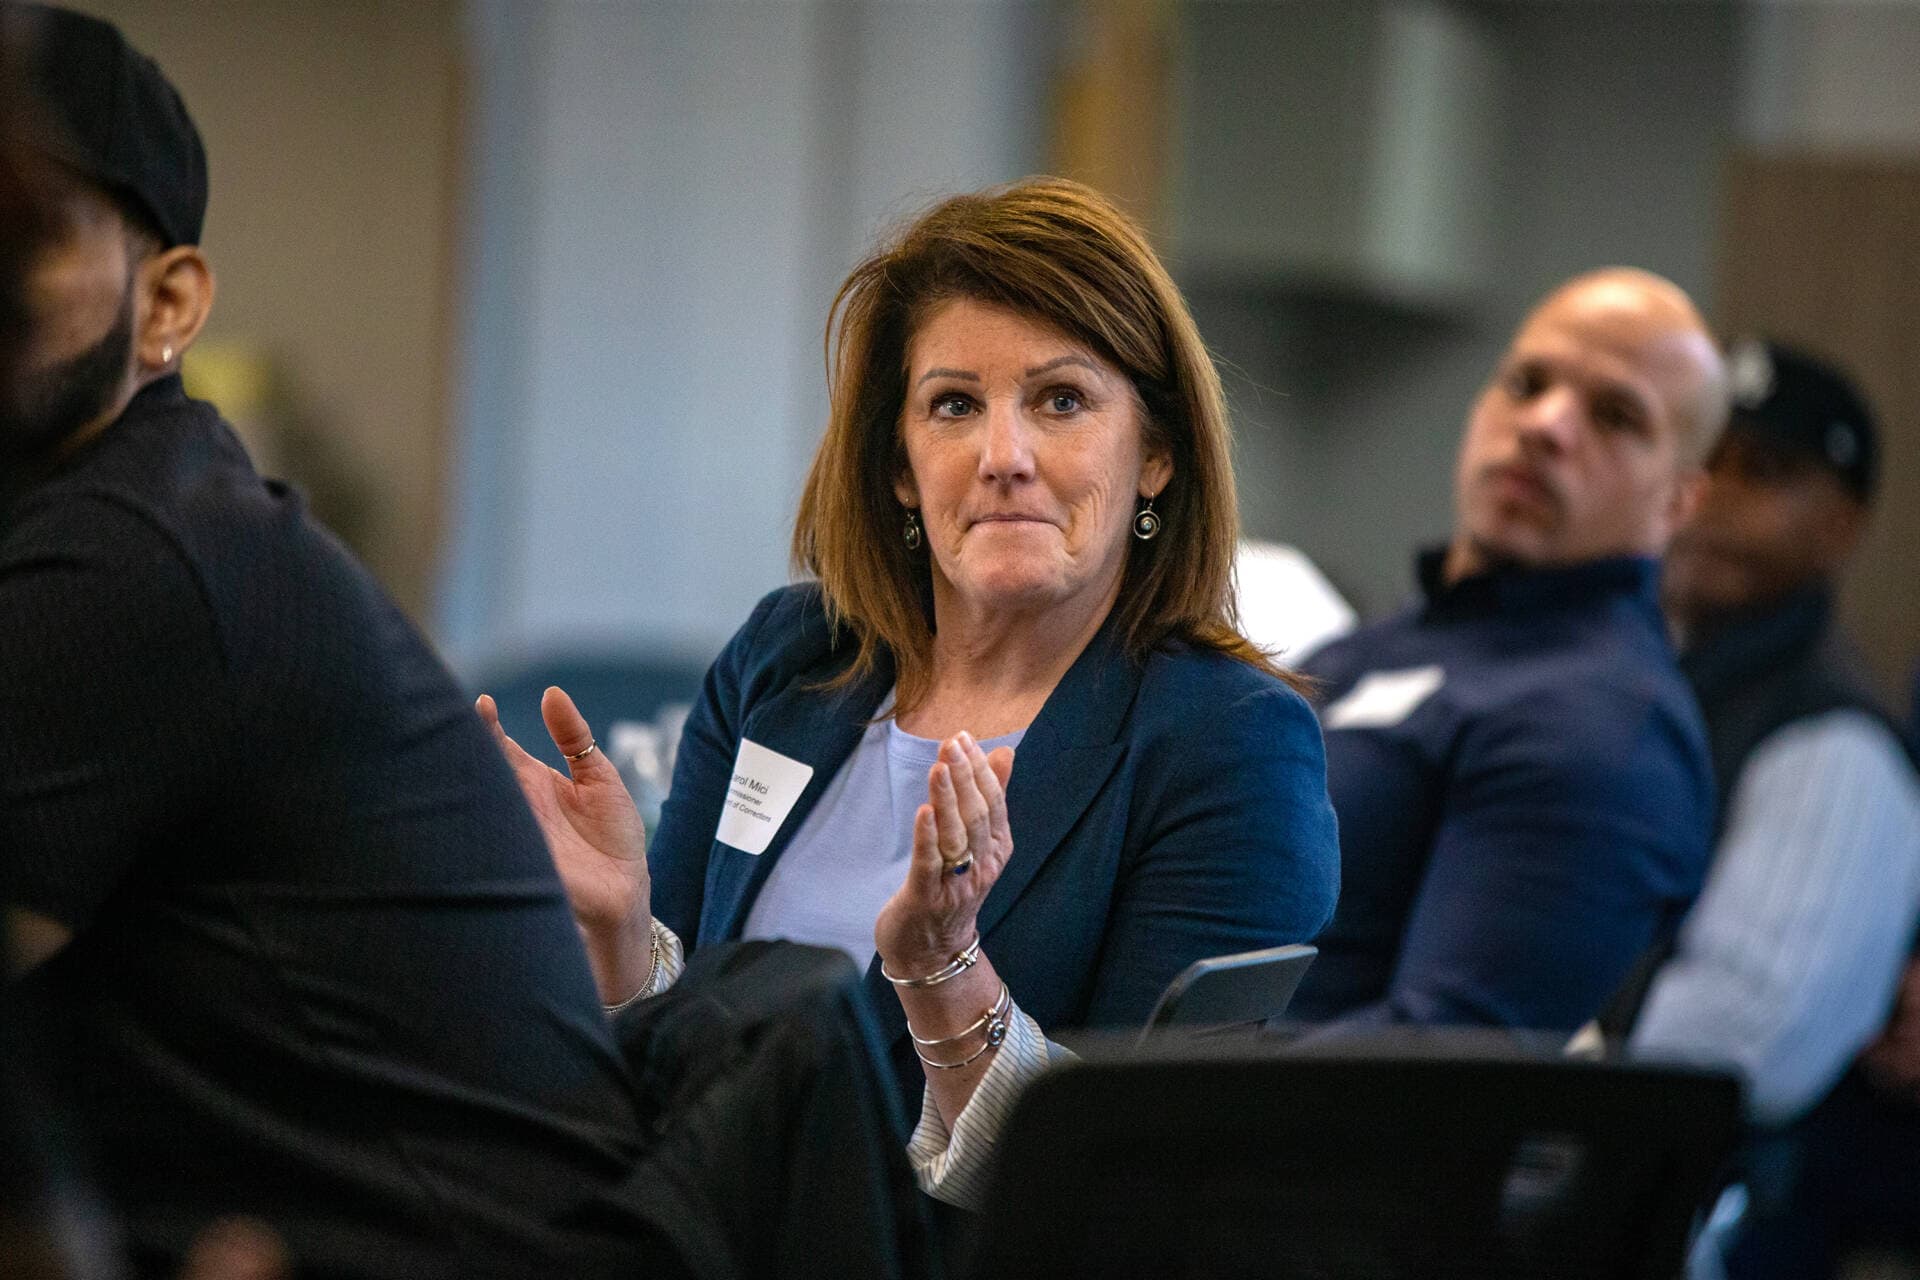 Carol Mici, Commissioner of the Department of Corrections, applauds after hearing a testimonial from one of the former participants of the School of Reentry program during a roundtable discussion at the Boston Pre-Release Center. (Jesse Costa/WBUR)